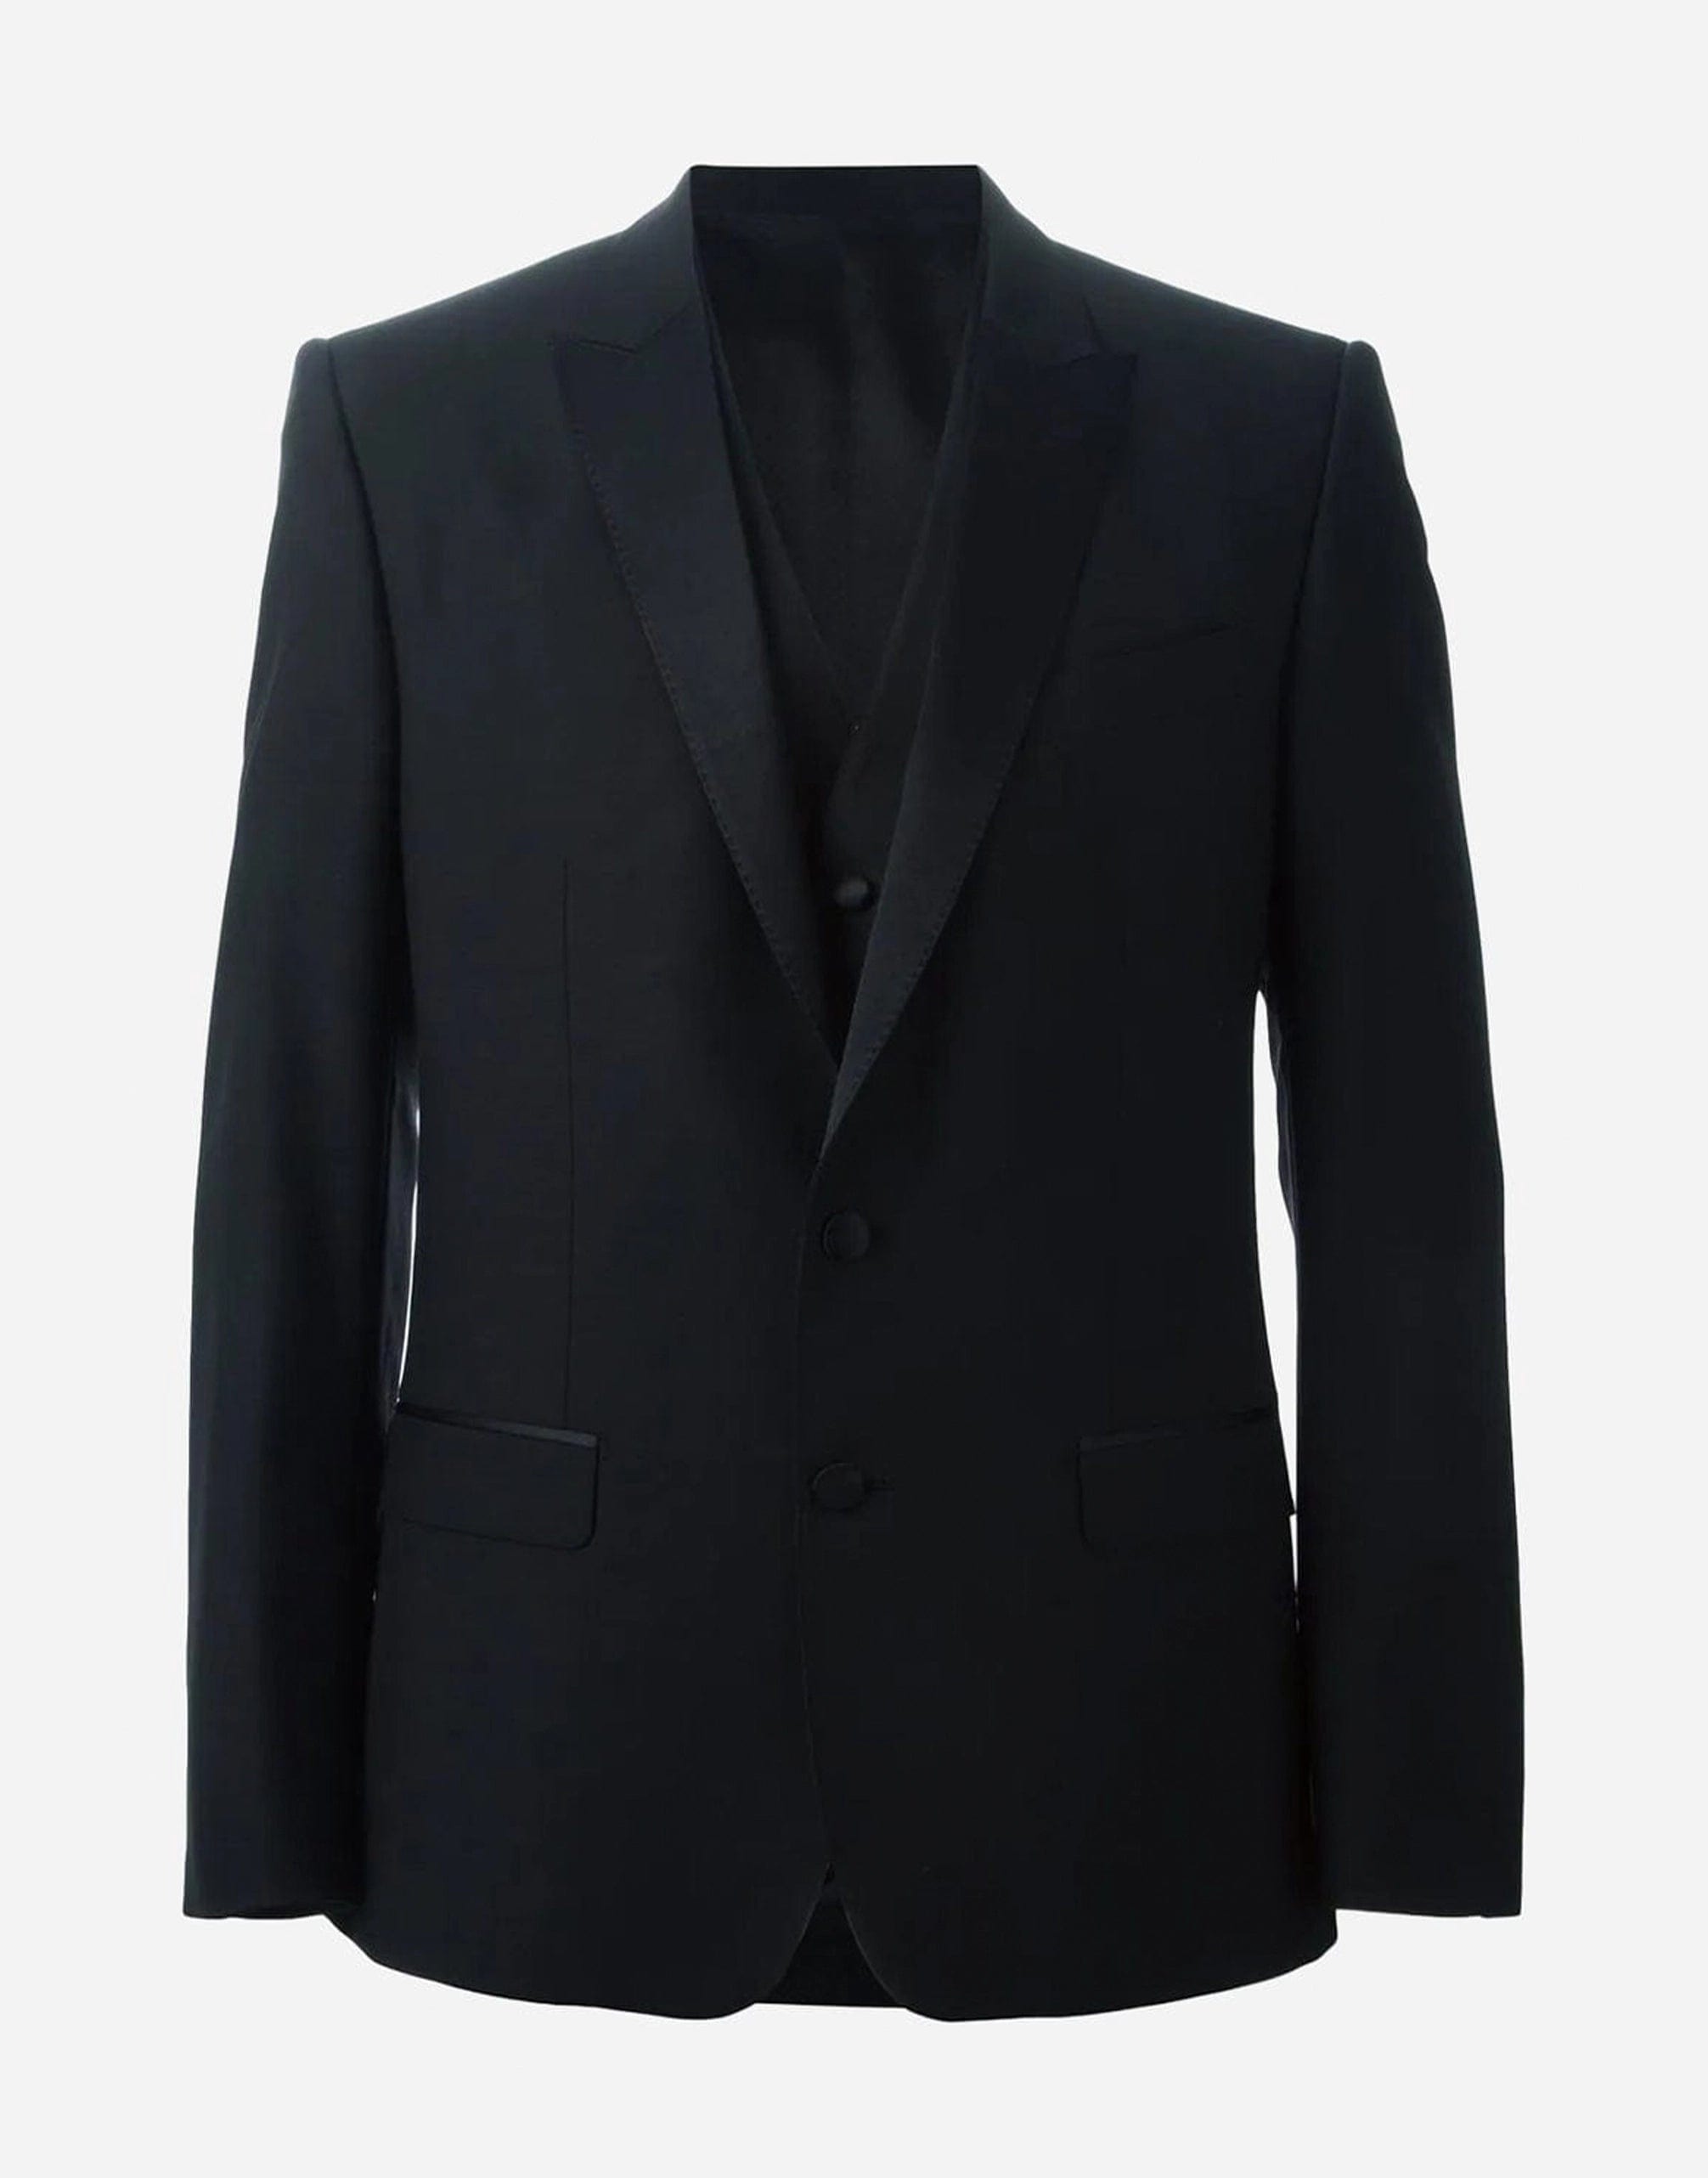 Dolce & Gabbana Wool Two-Piece Dinner Suit